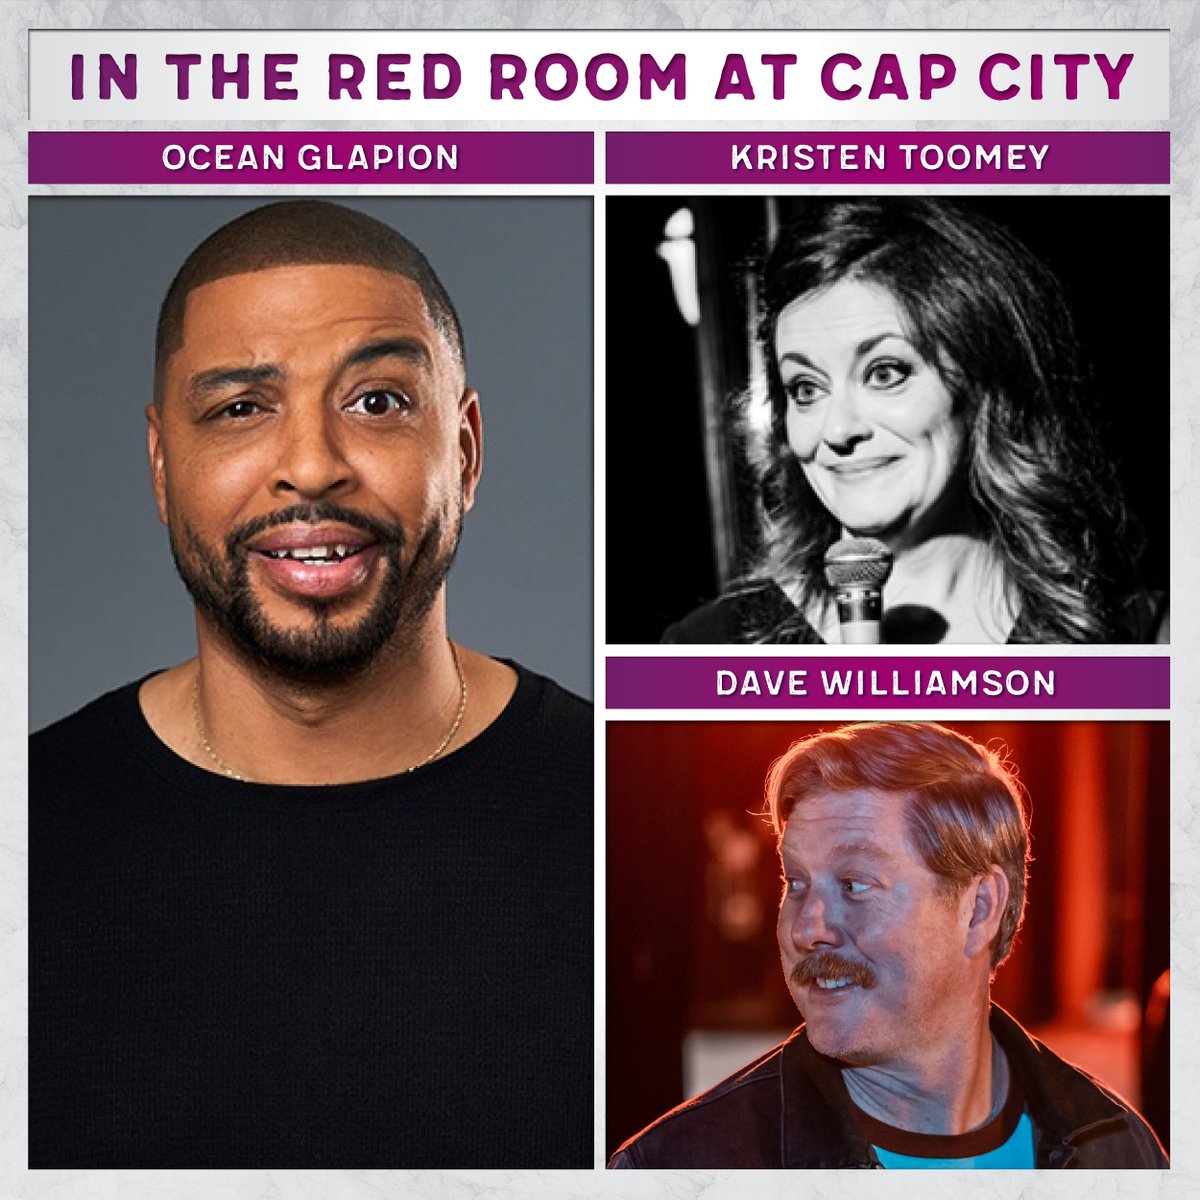 This Week at Cap City | @PaulElia, @WHMPodcast, @LuisChataing, Luis Diaz, + @joshwolfcomedy headlines the weekend! PLUS @KristenToomey, @OceanLive, + @DaveWComedy in The Red Room! Grab your tickets now: bit.ly/3hTxS3n